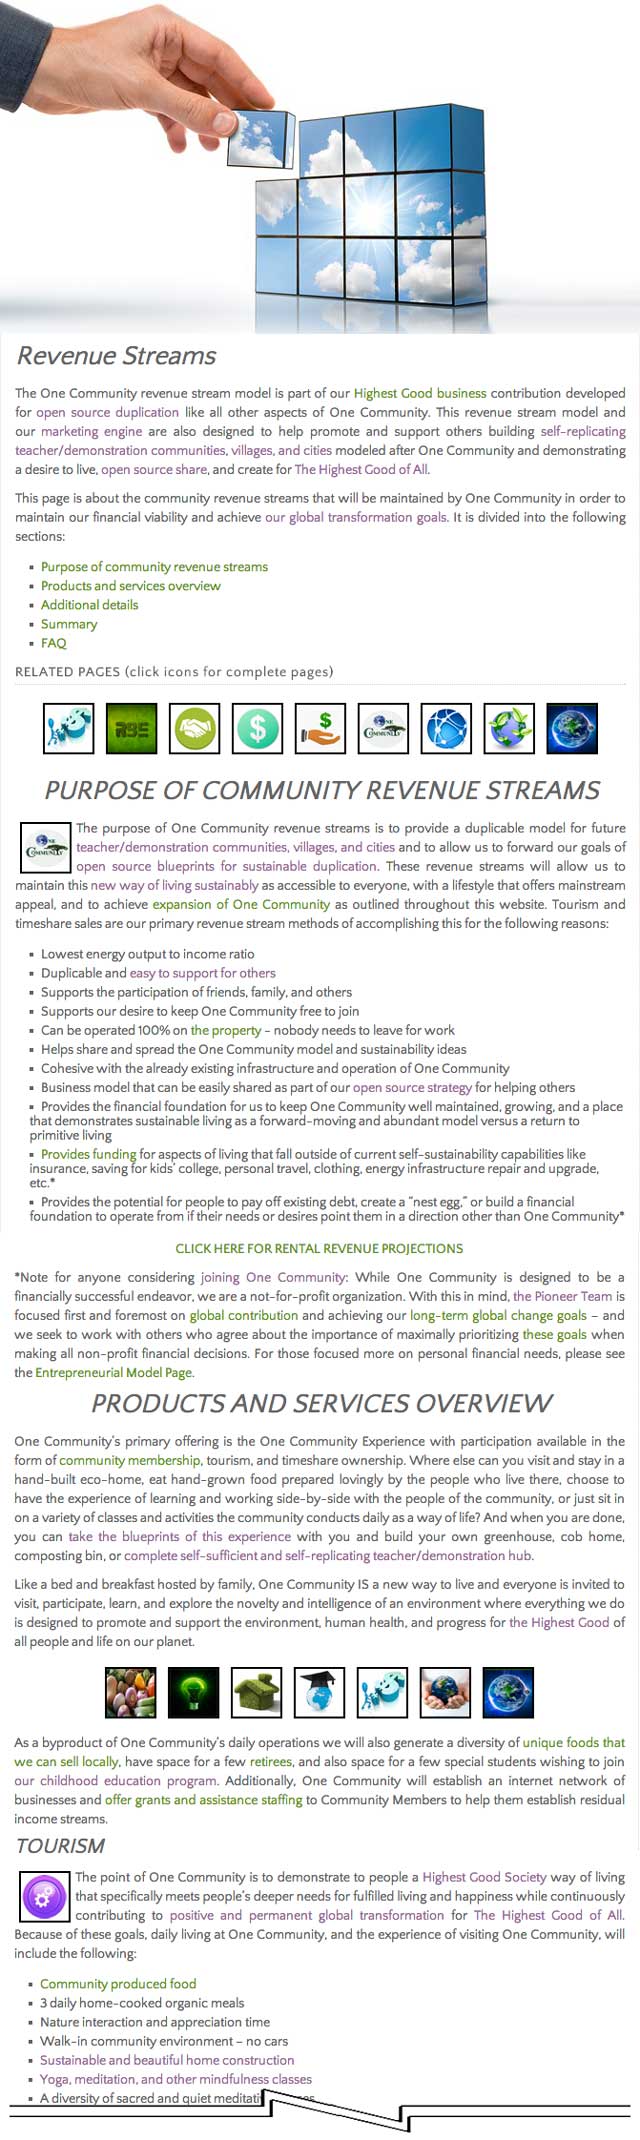 Revenue streams, One Community, Adaptable Solutions for Society